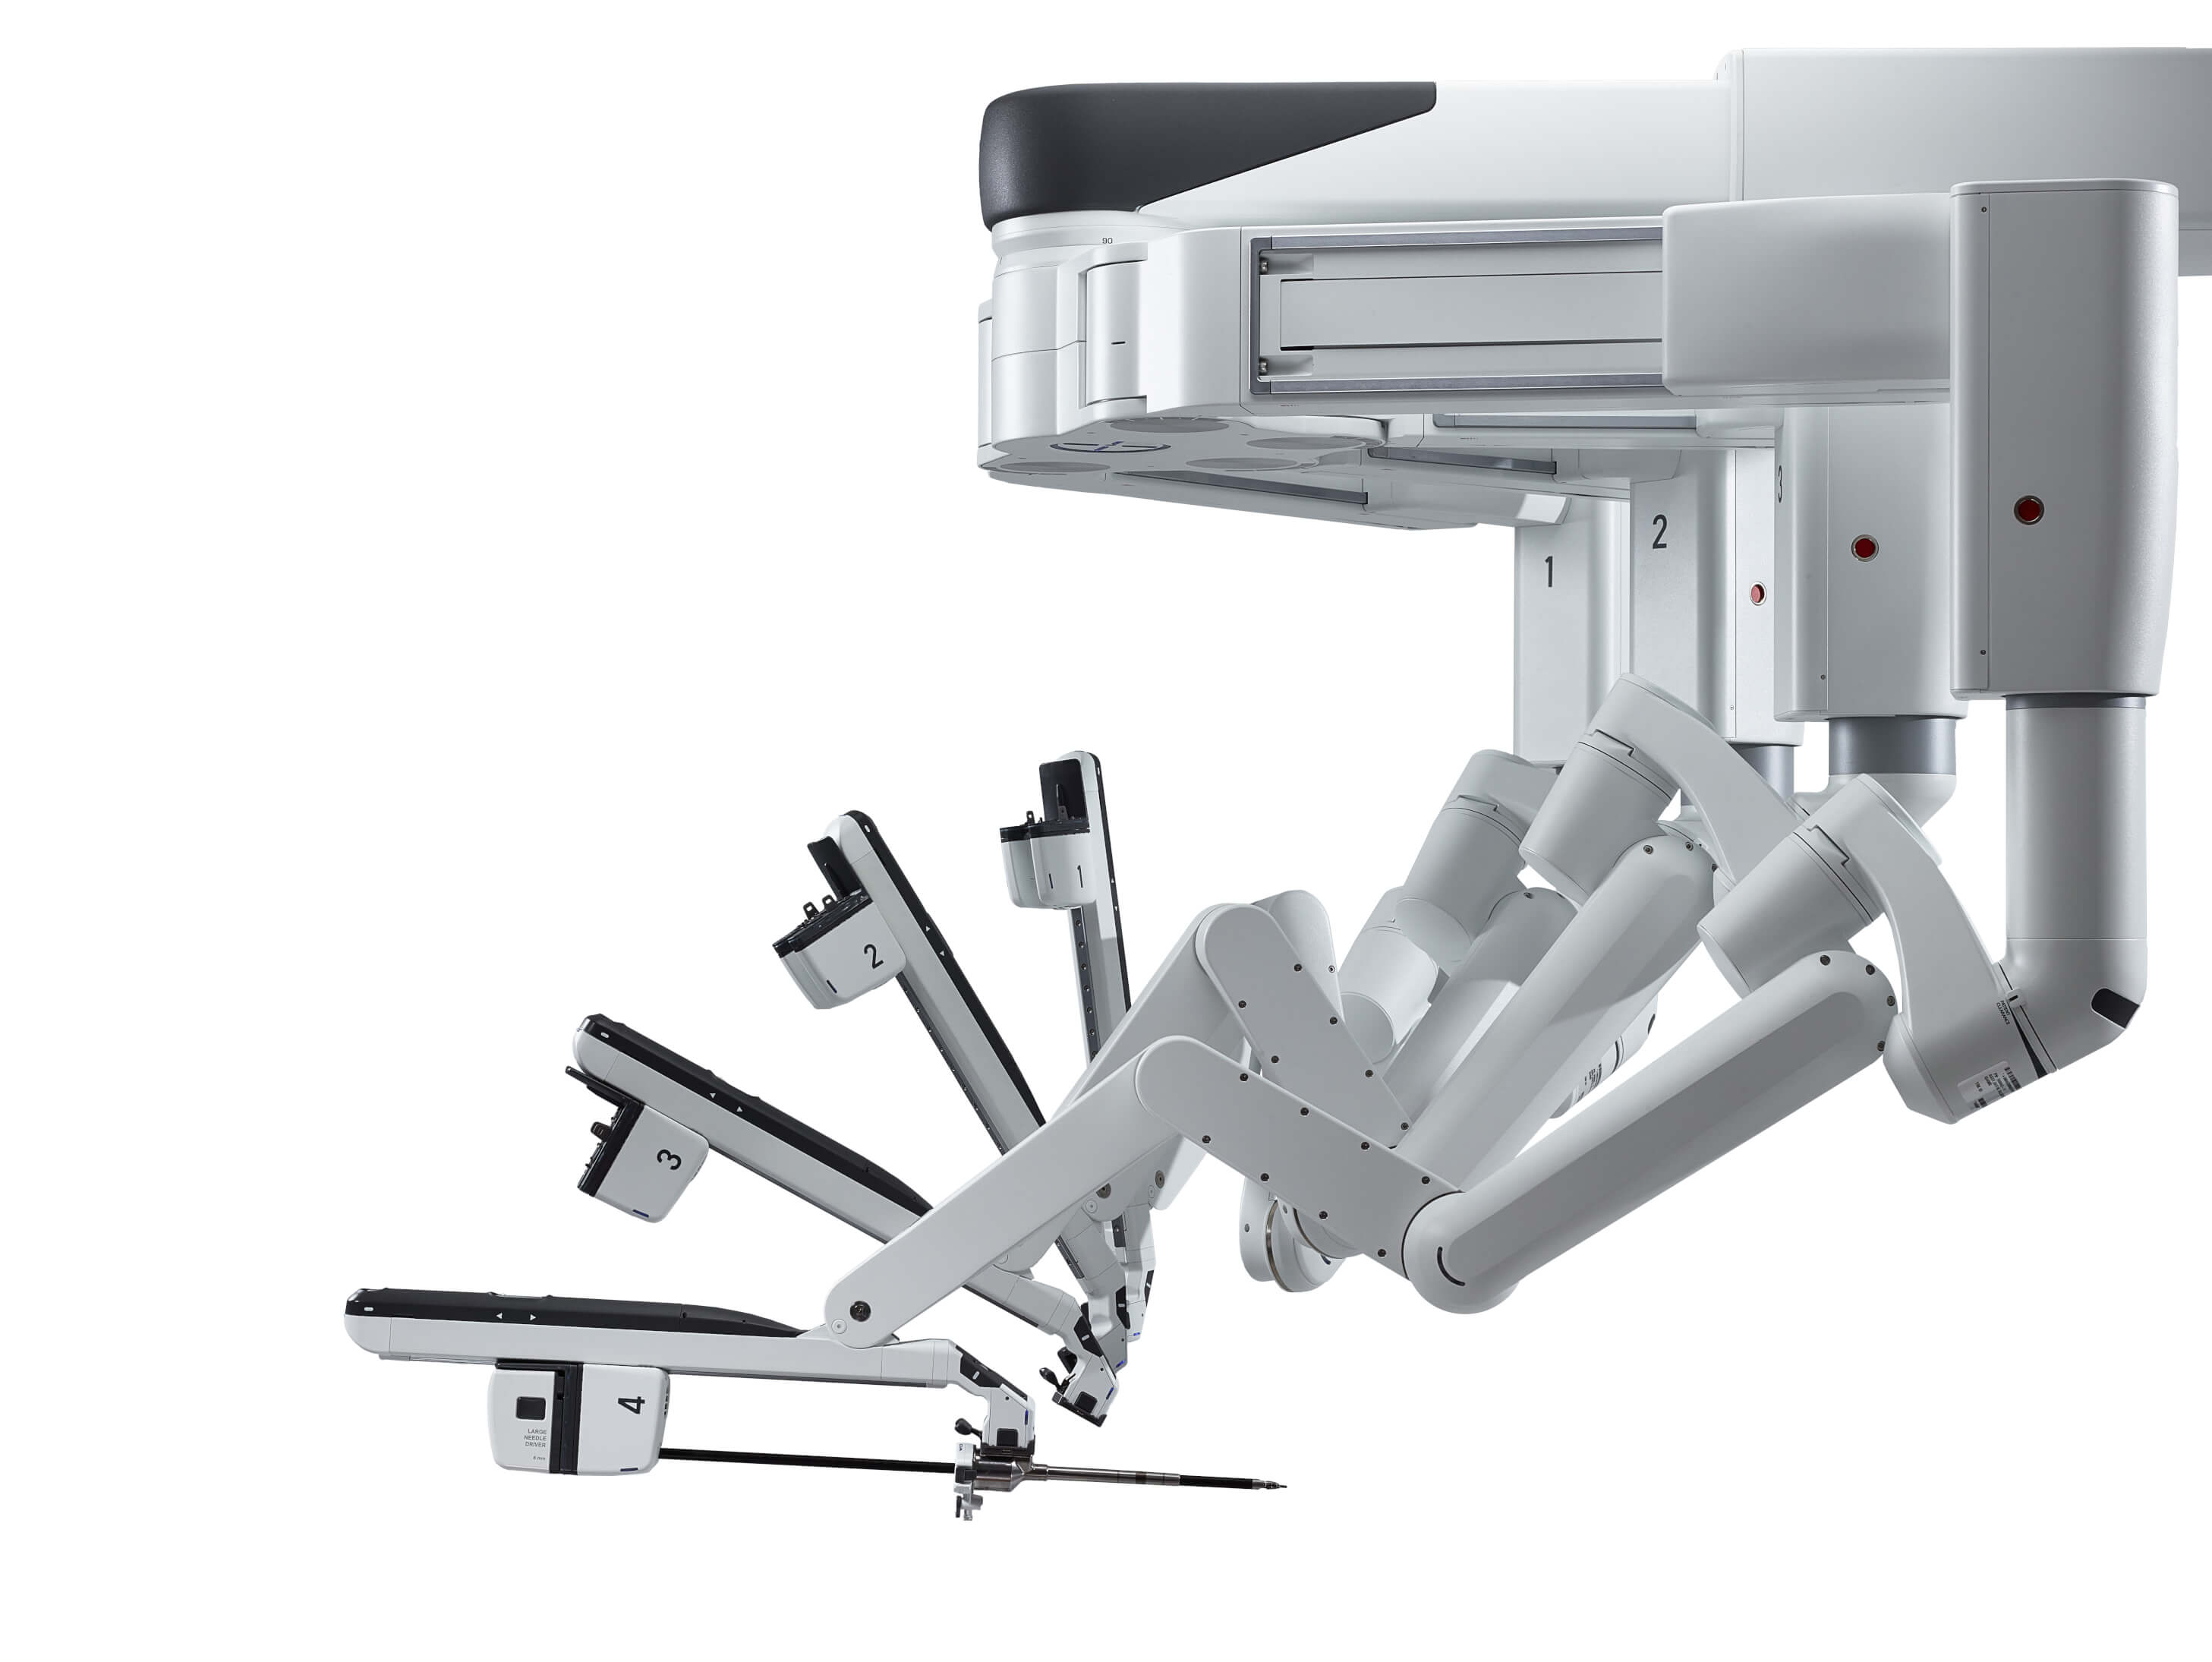 Robotic surgery for the prostate